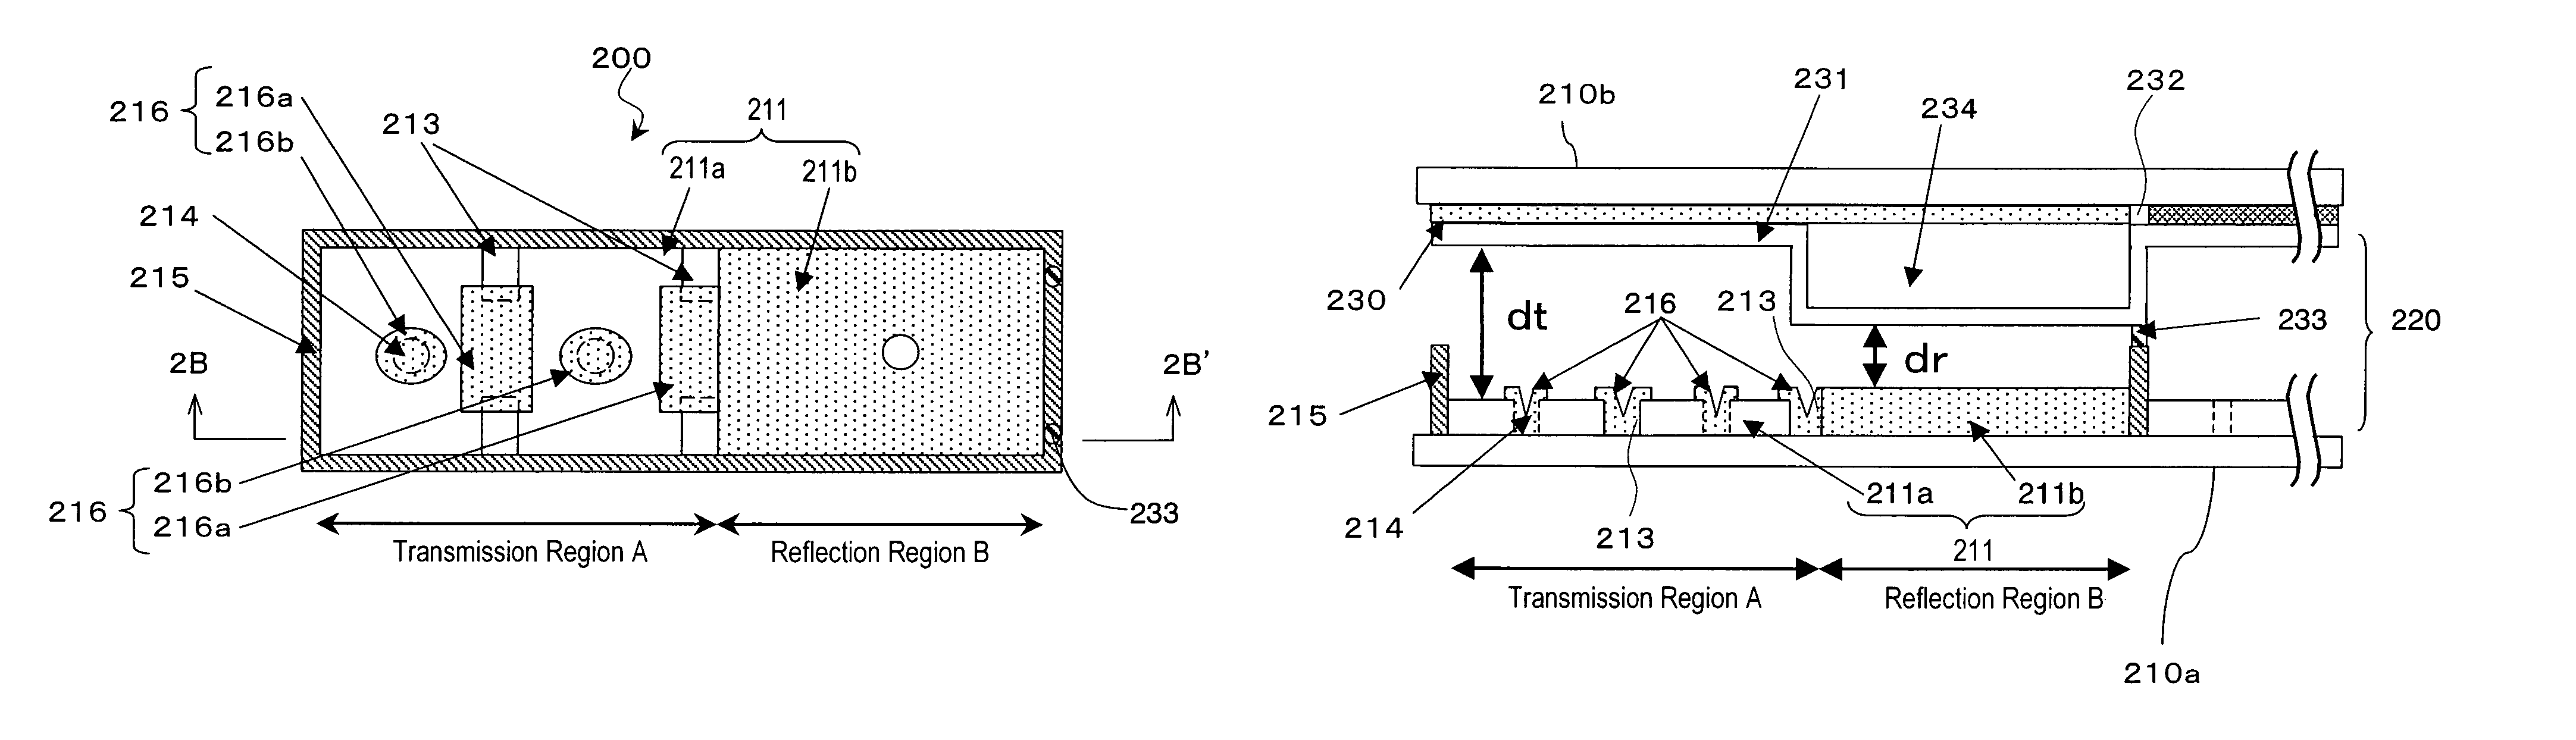 Liquid crystal display device comprising a shading conductive layer formed at least near an opening or cut of an electrode